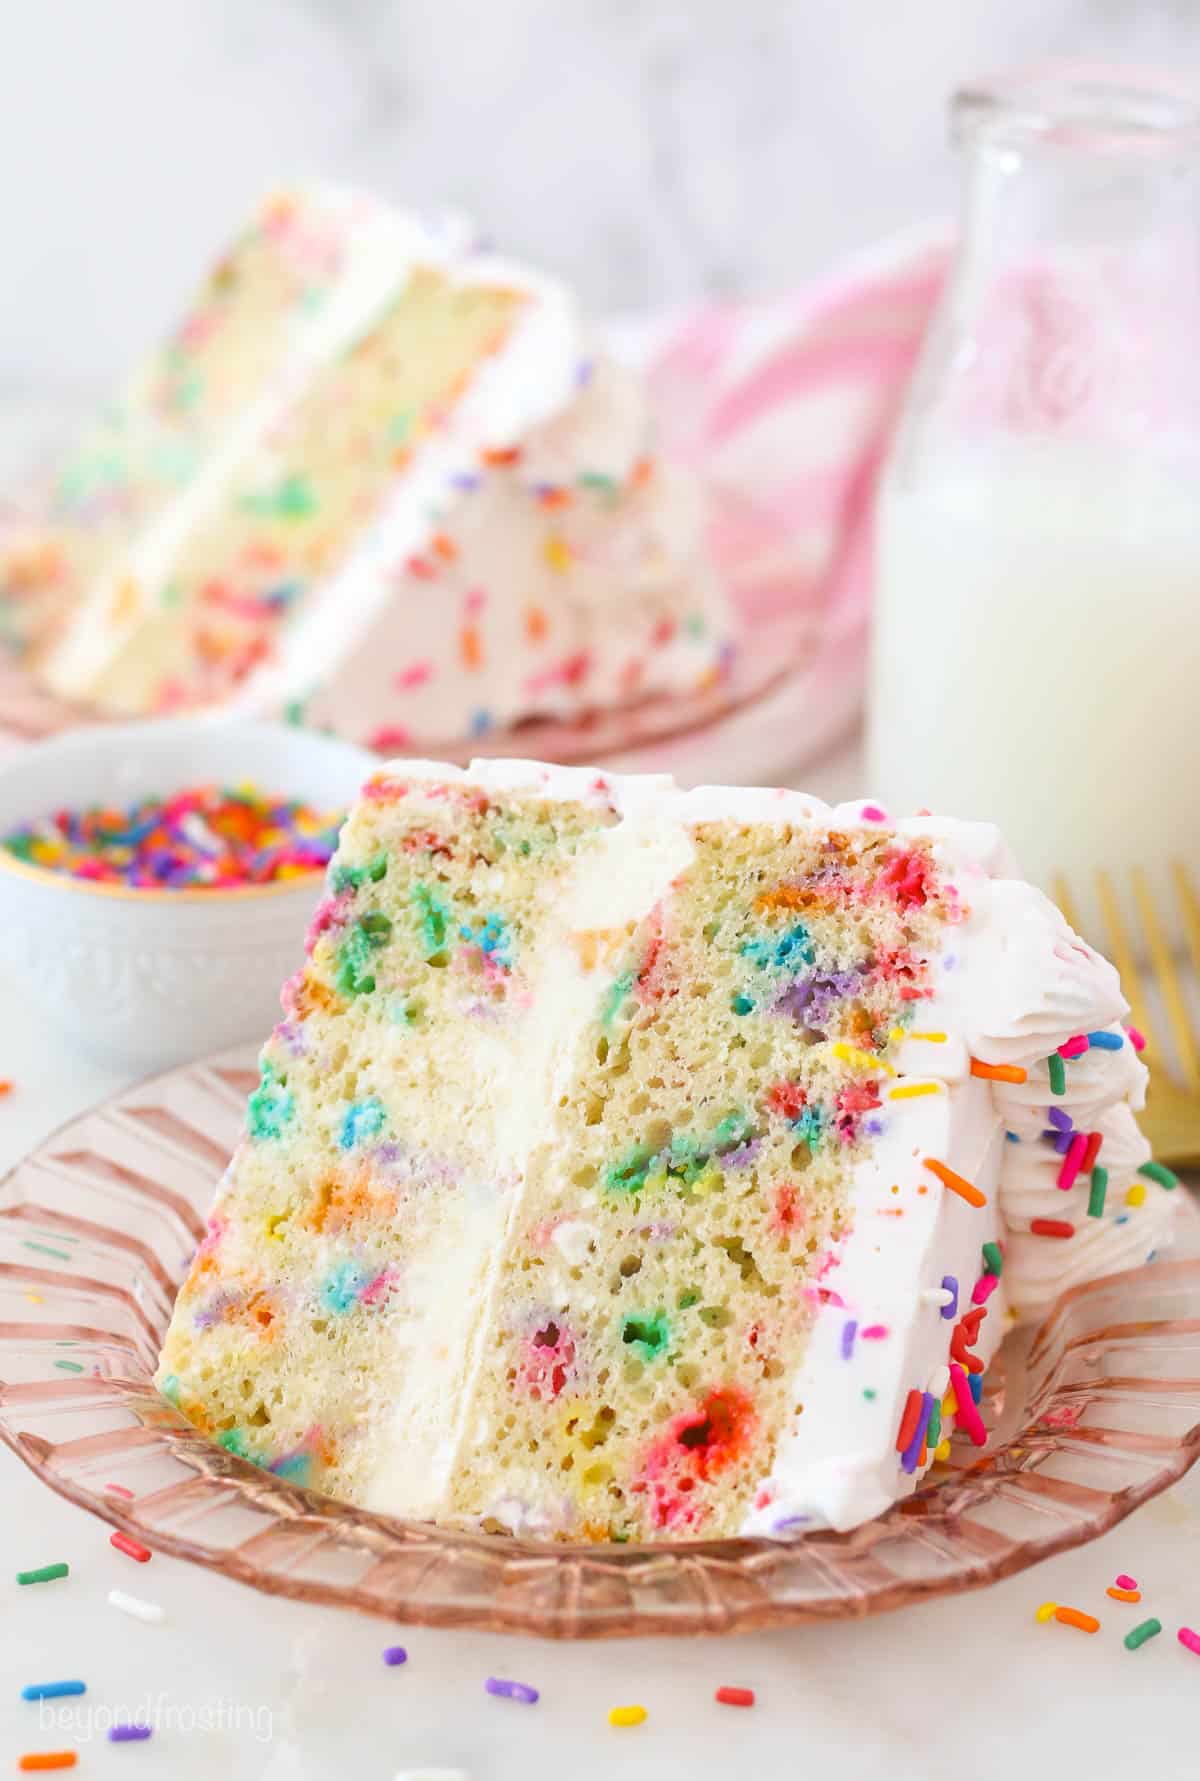 A slice of Funfetti ice cream cake on a pink plate, a small bowl of sprinkles and a glass of milk